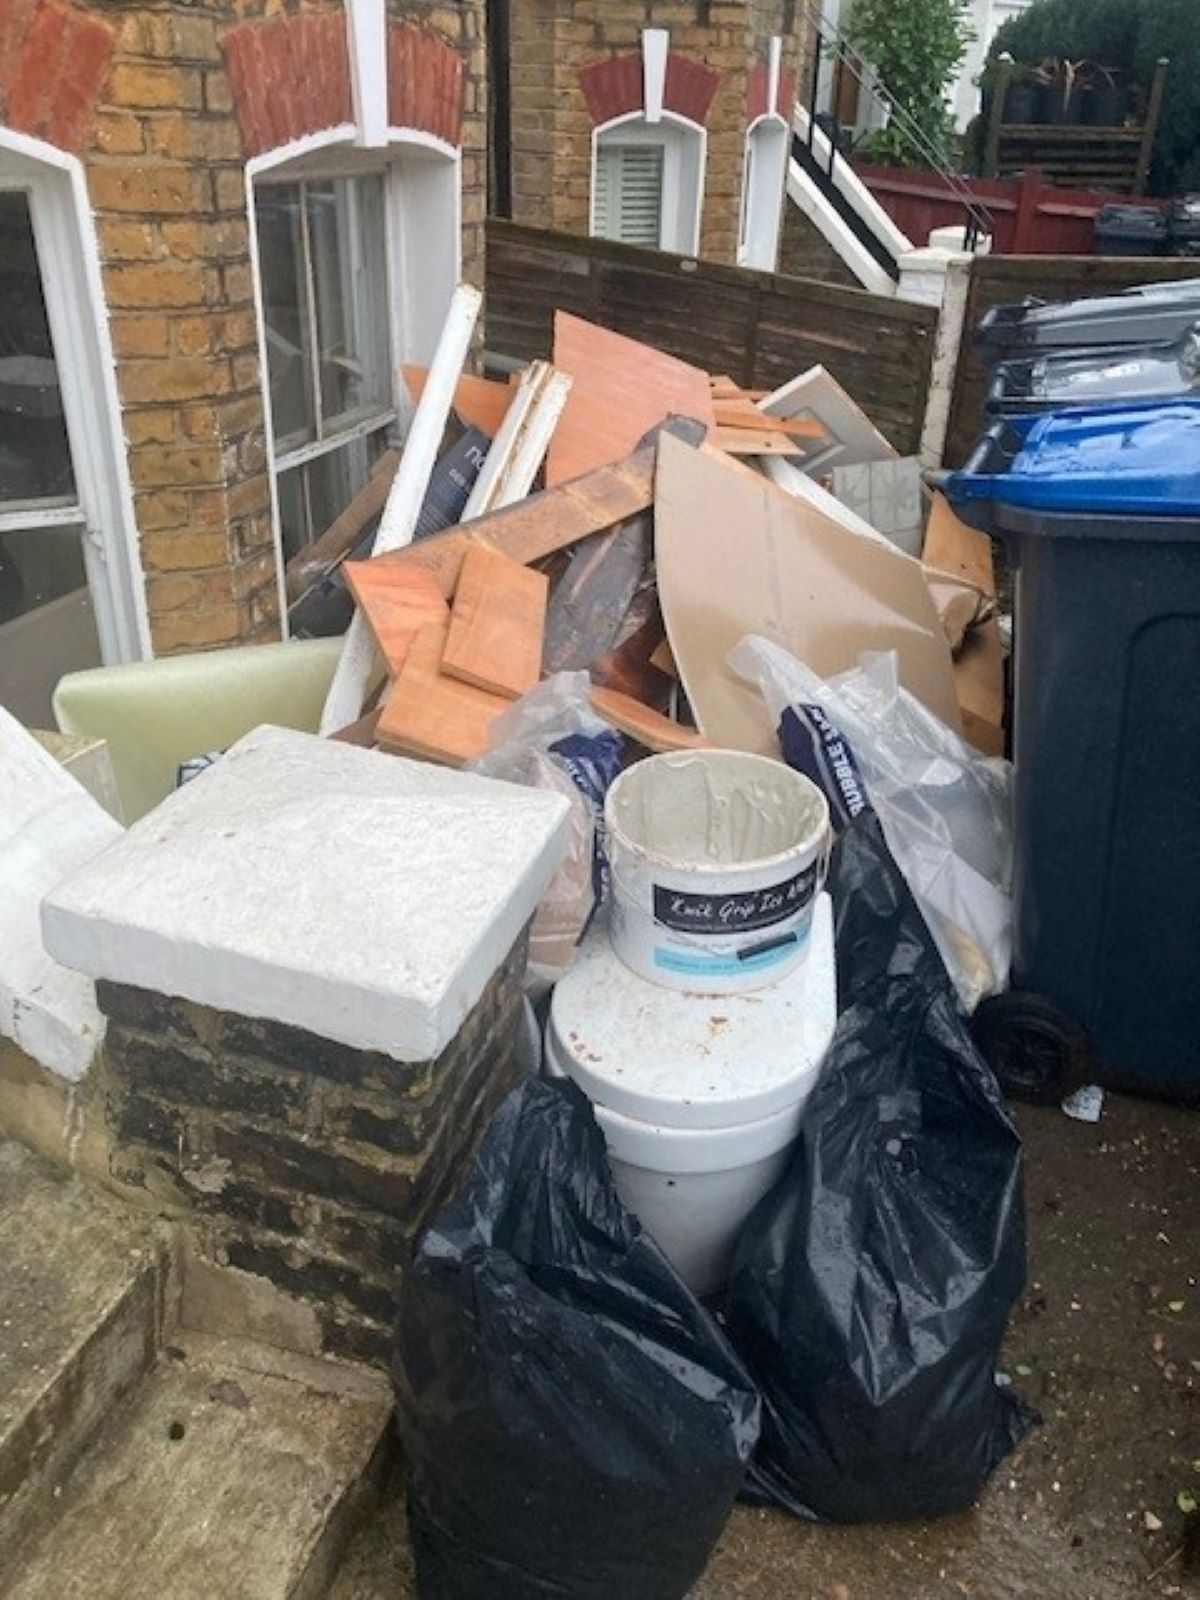 Domestic and commercial waste waiting to be cleared by Rubbish Clearance Deal